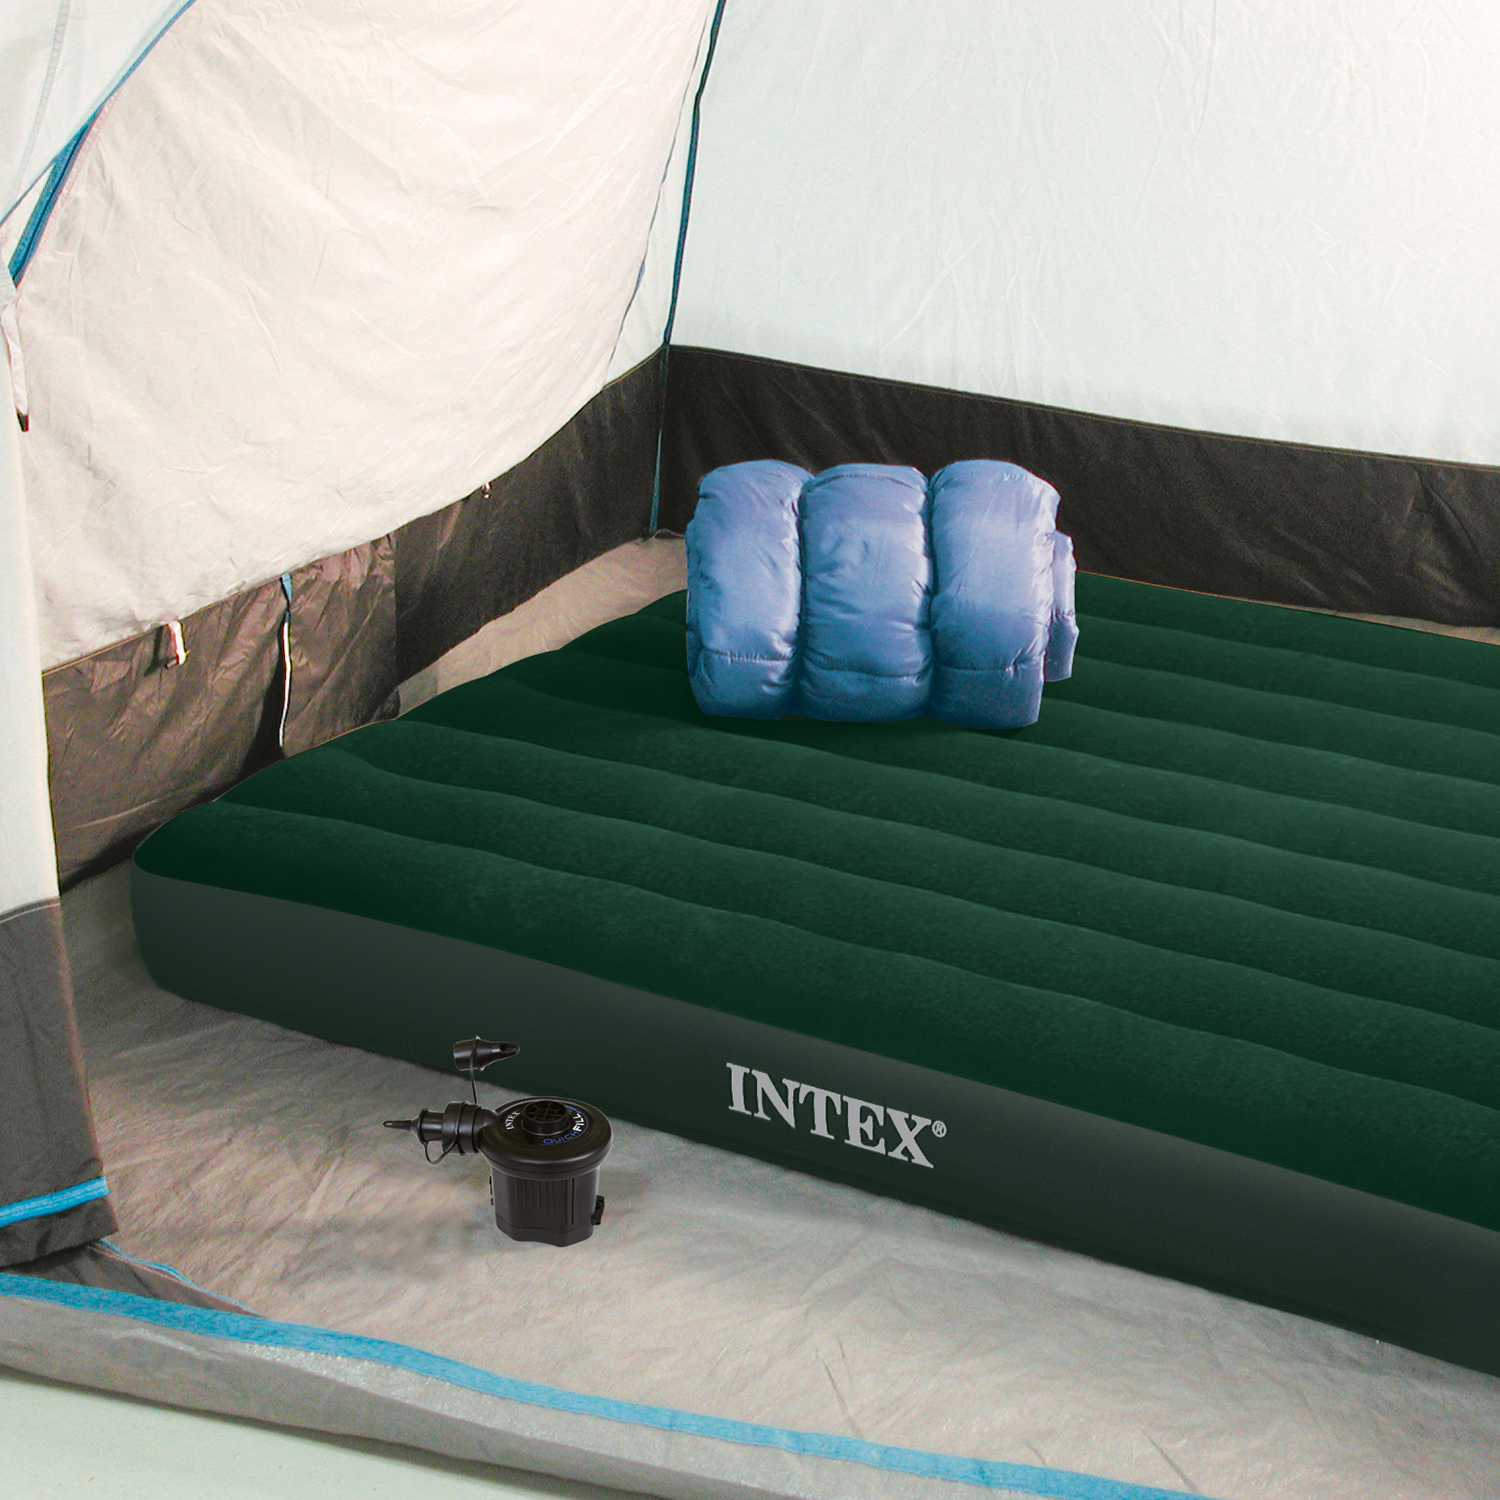 Intex 66969E Prestige Air Bed Outdoor Camping Downy Inflatable Mattress, Queen - image 3 of 8